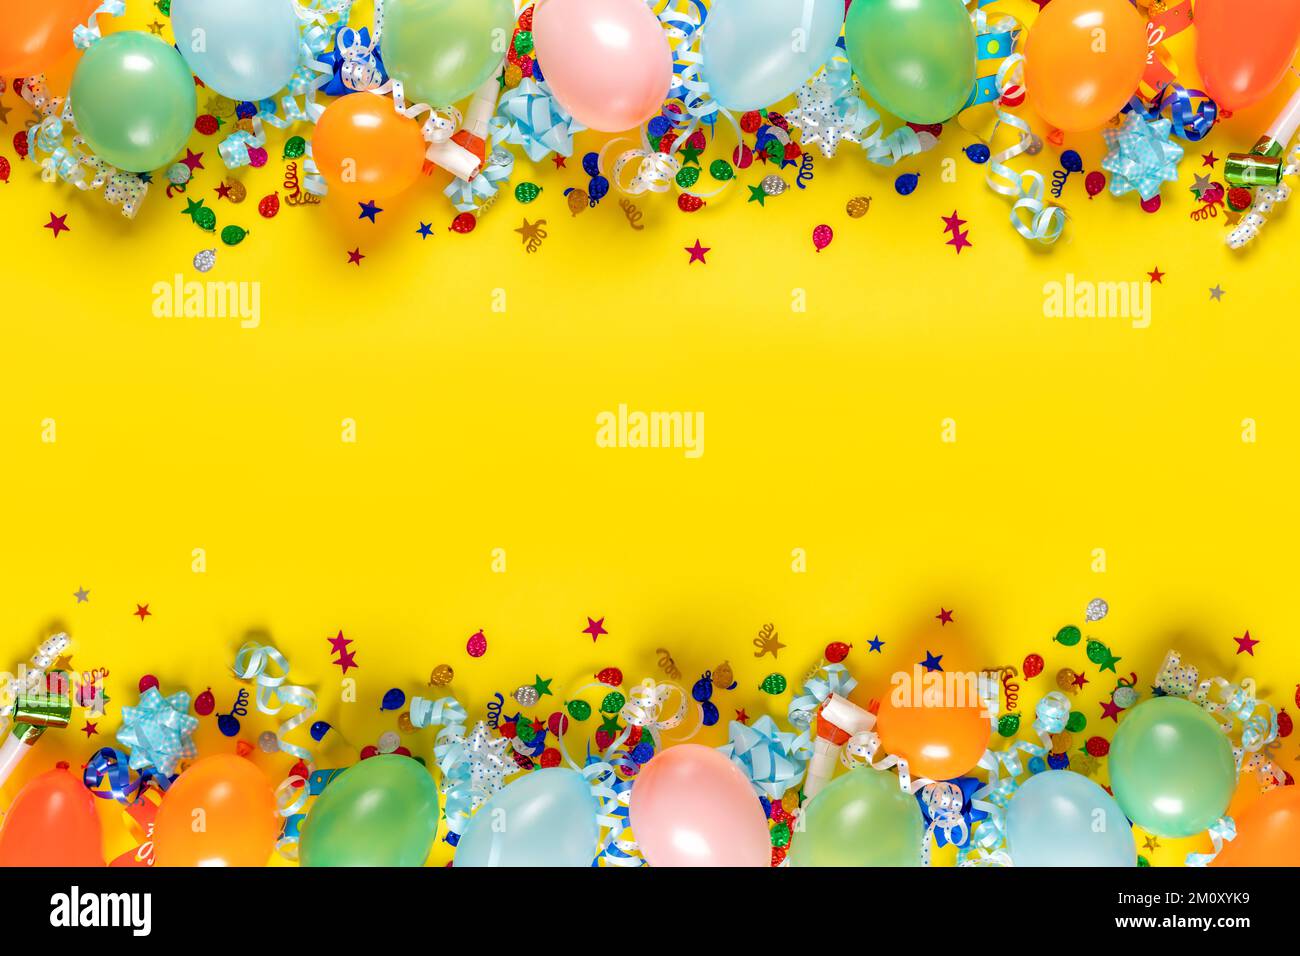 Birthday background top view. Frame of balloons and various party decorations on yellow background Stock Photo